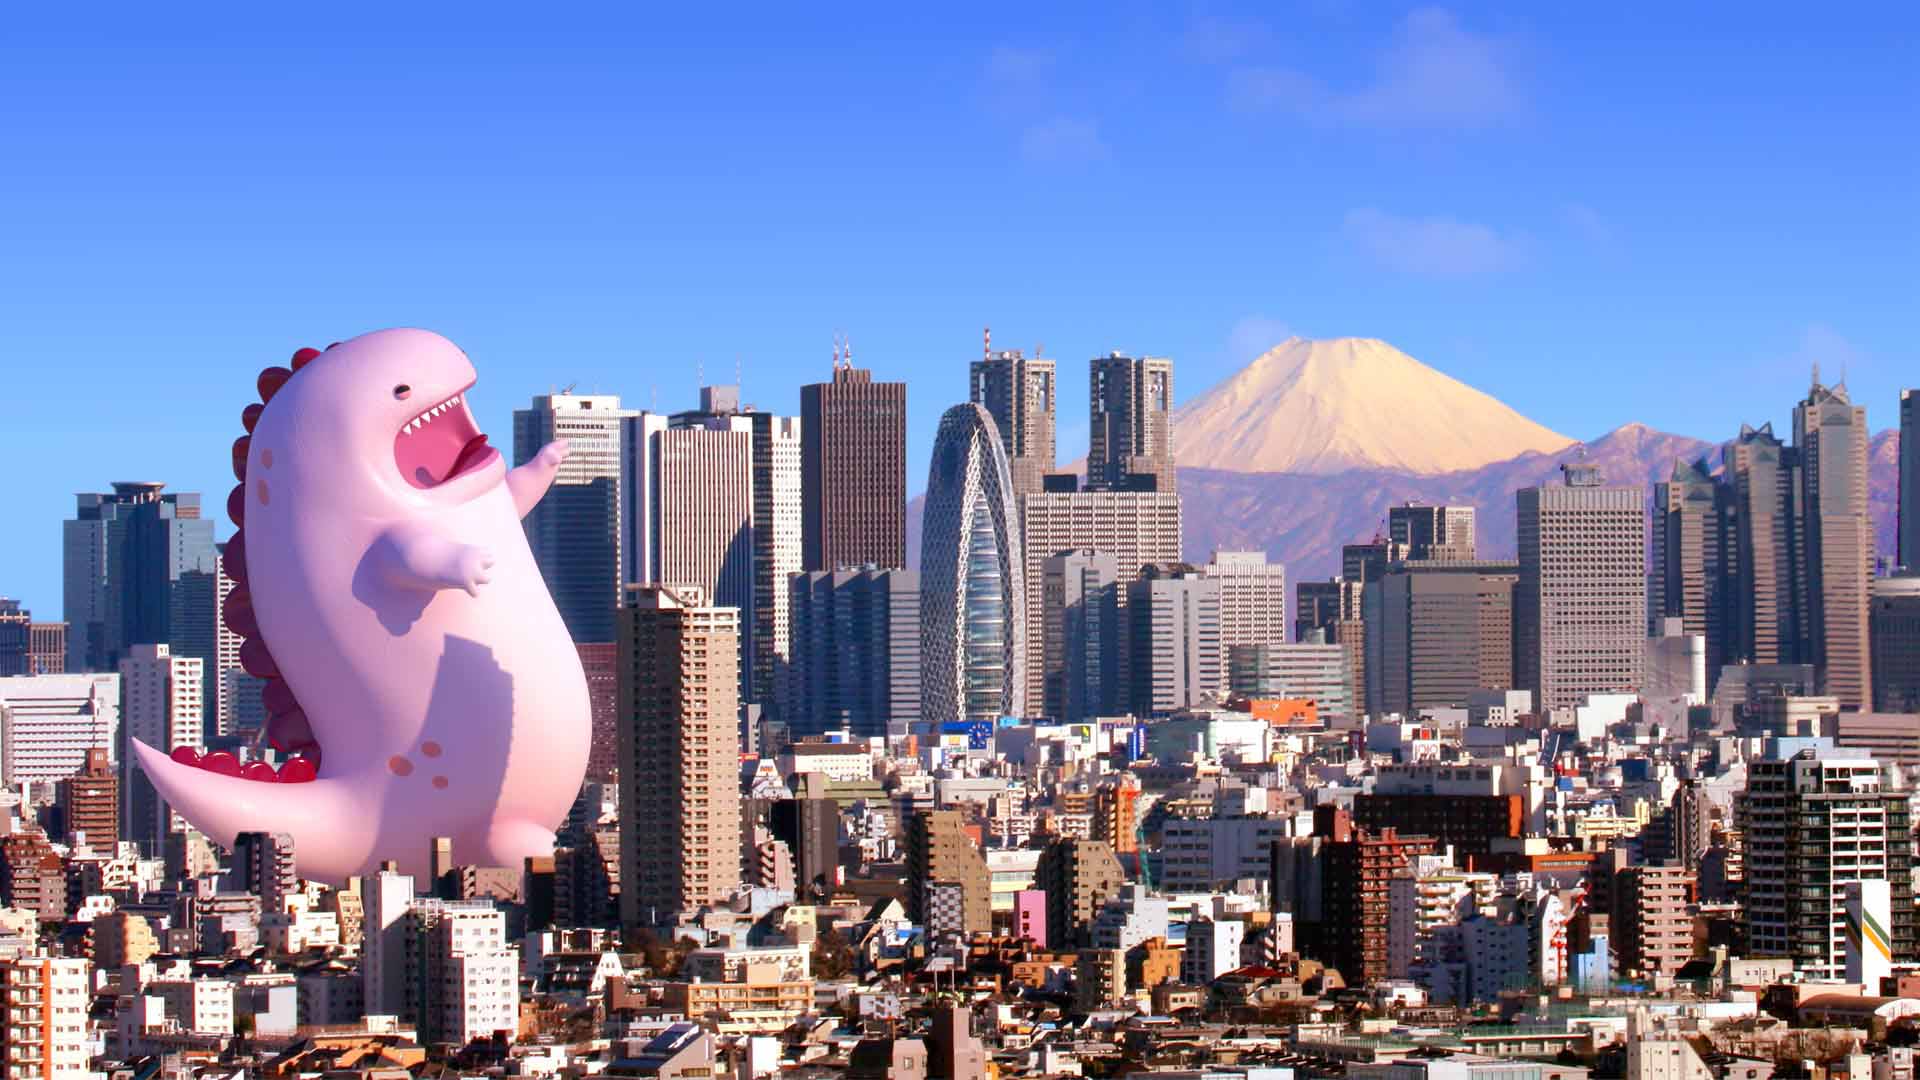 3D animation of a giant pink monster walking through Tokyo